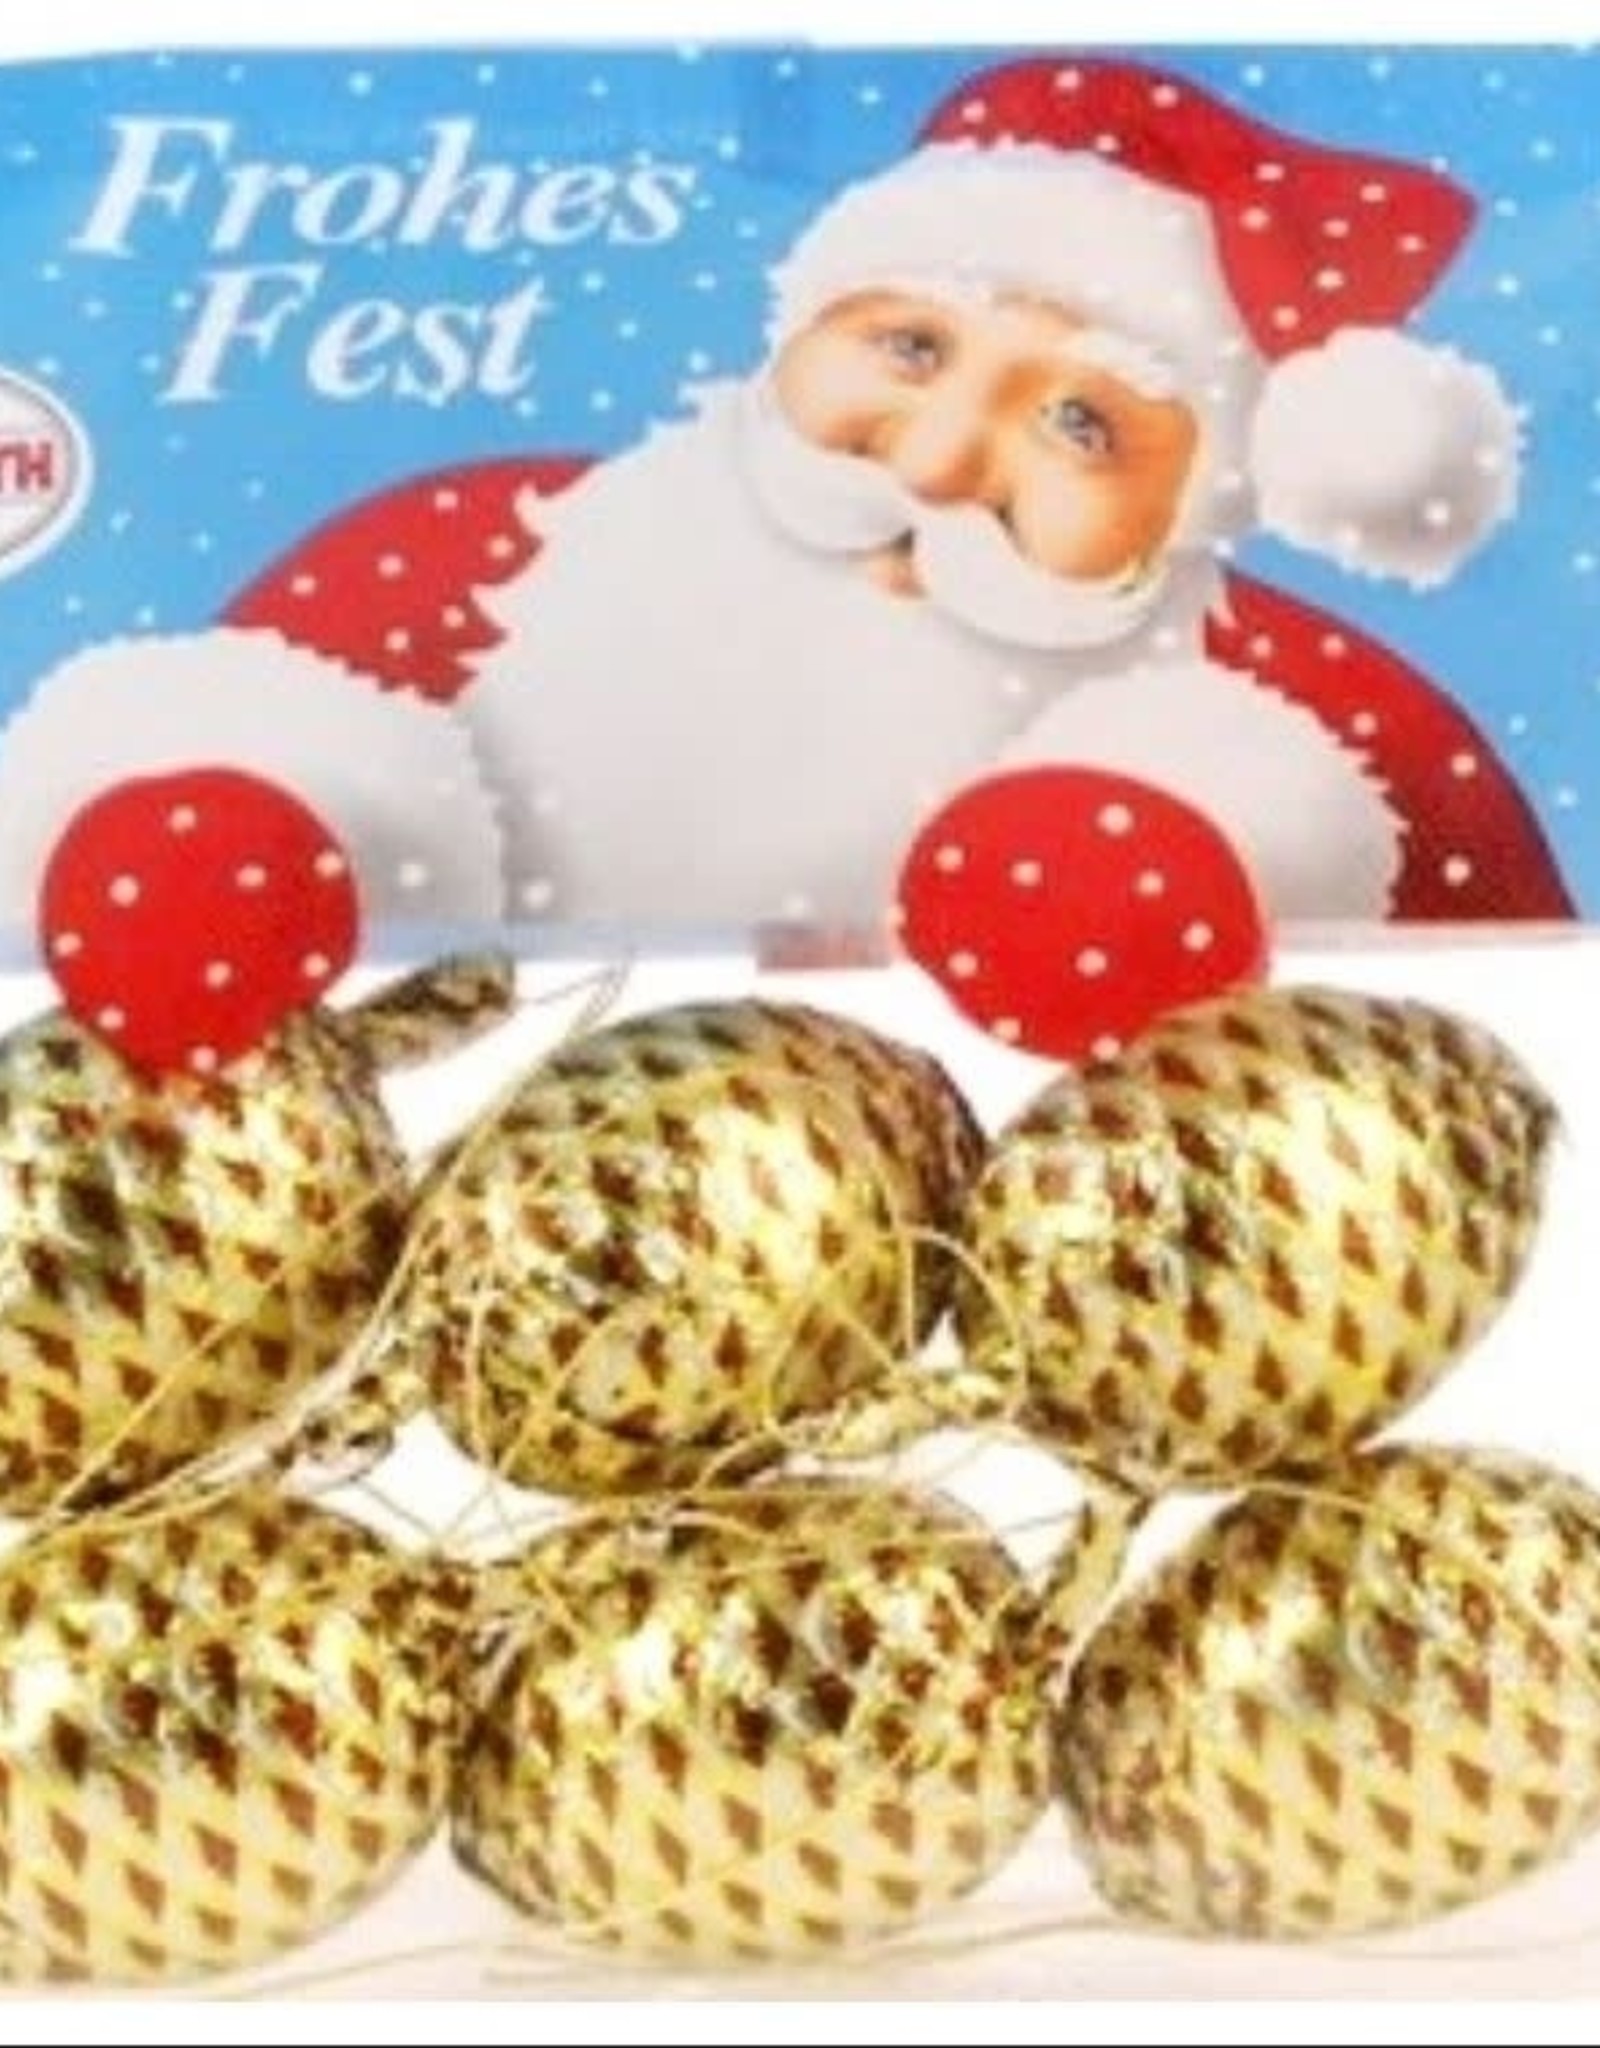 Norget & Co Holiday Treats - Chocolate Fir Cones